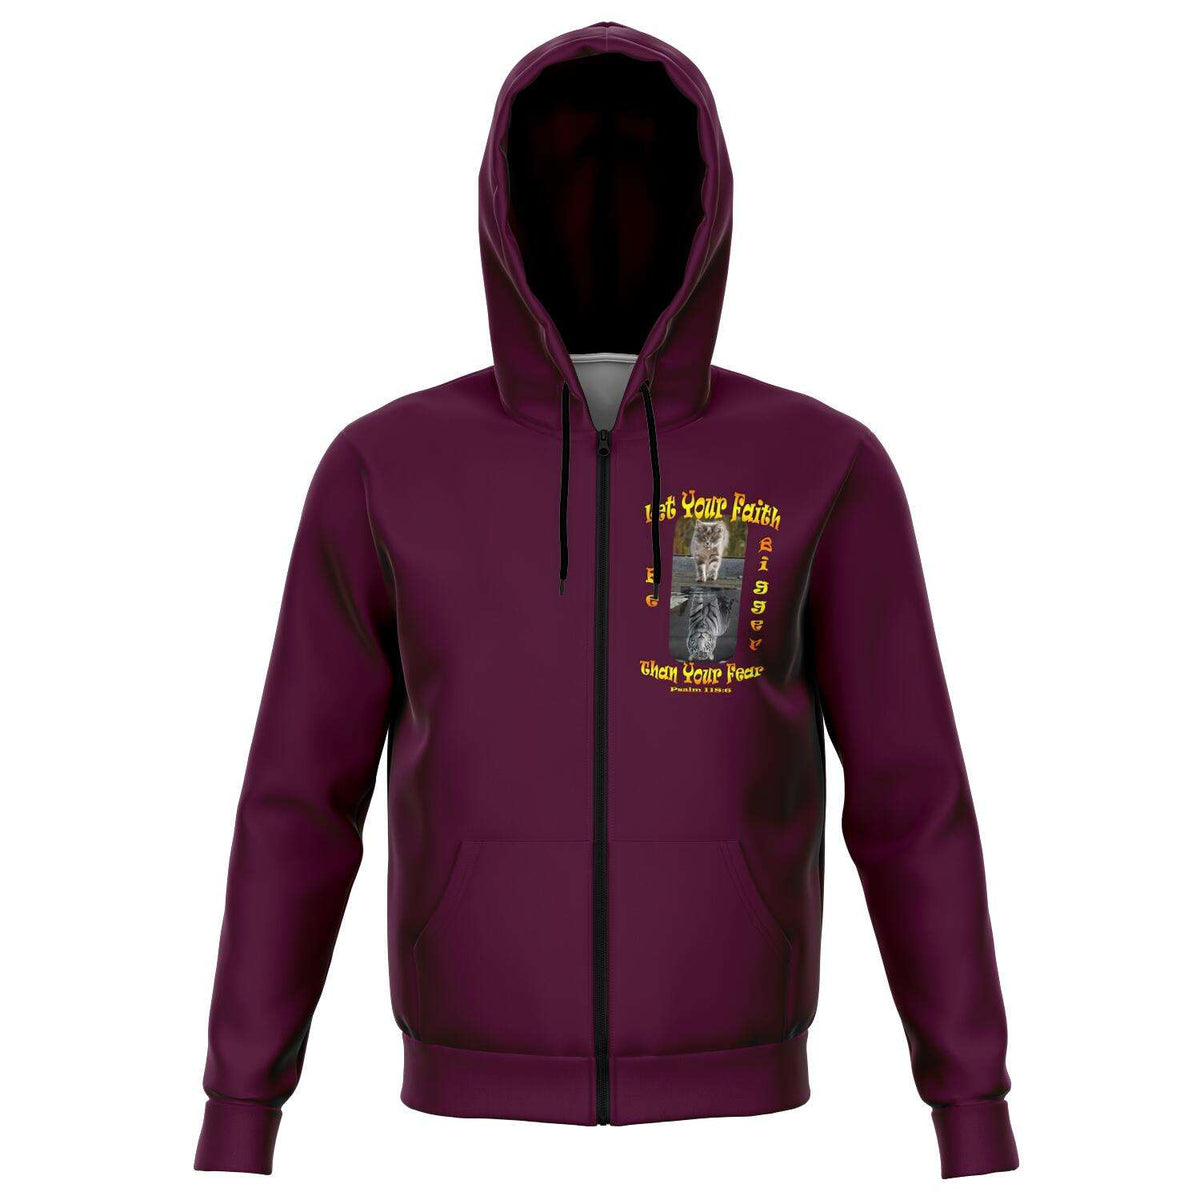 Designs by MyUtopia Shout Out:Let Your Faith Be Bigger Than Your Fear Fashion Zip Hooded Jacket,XS / Maroon,Fashion Zip-Up Hoodie - AOP